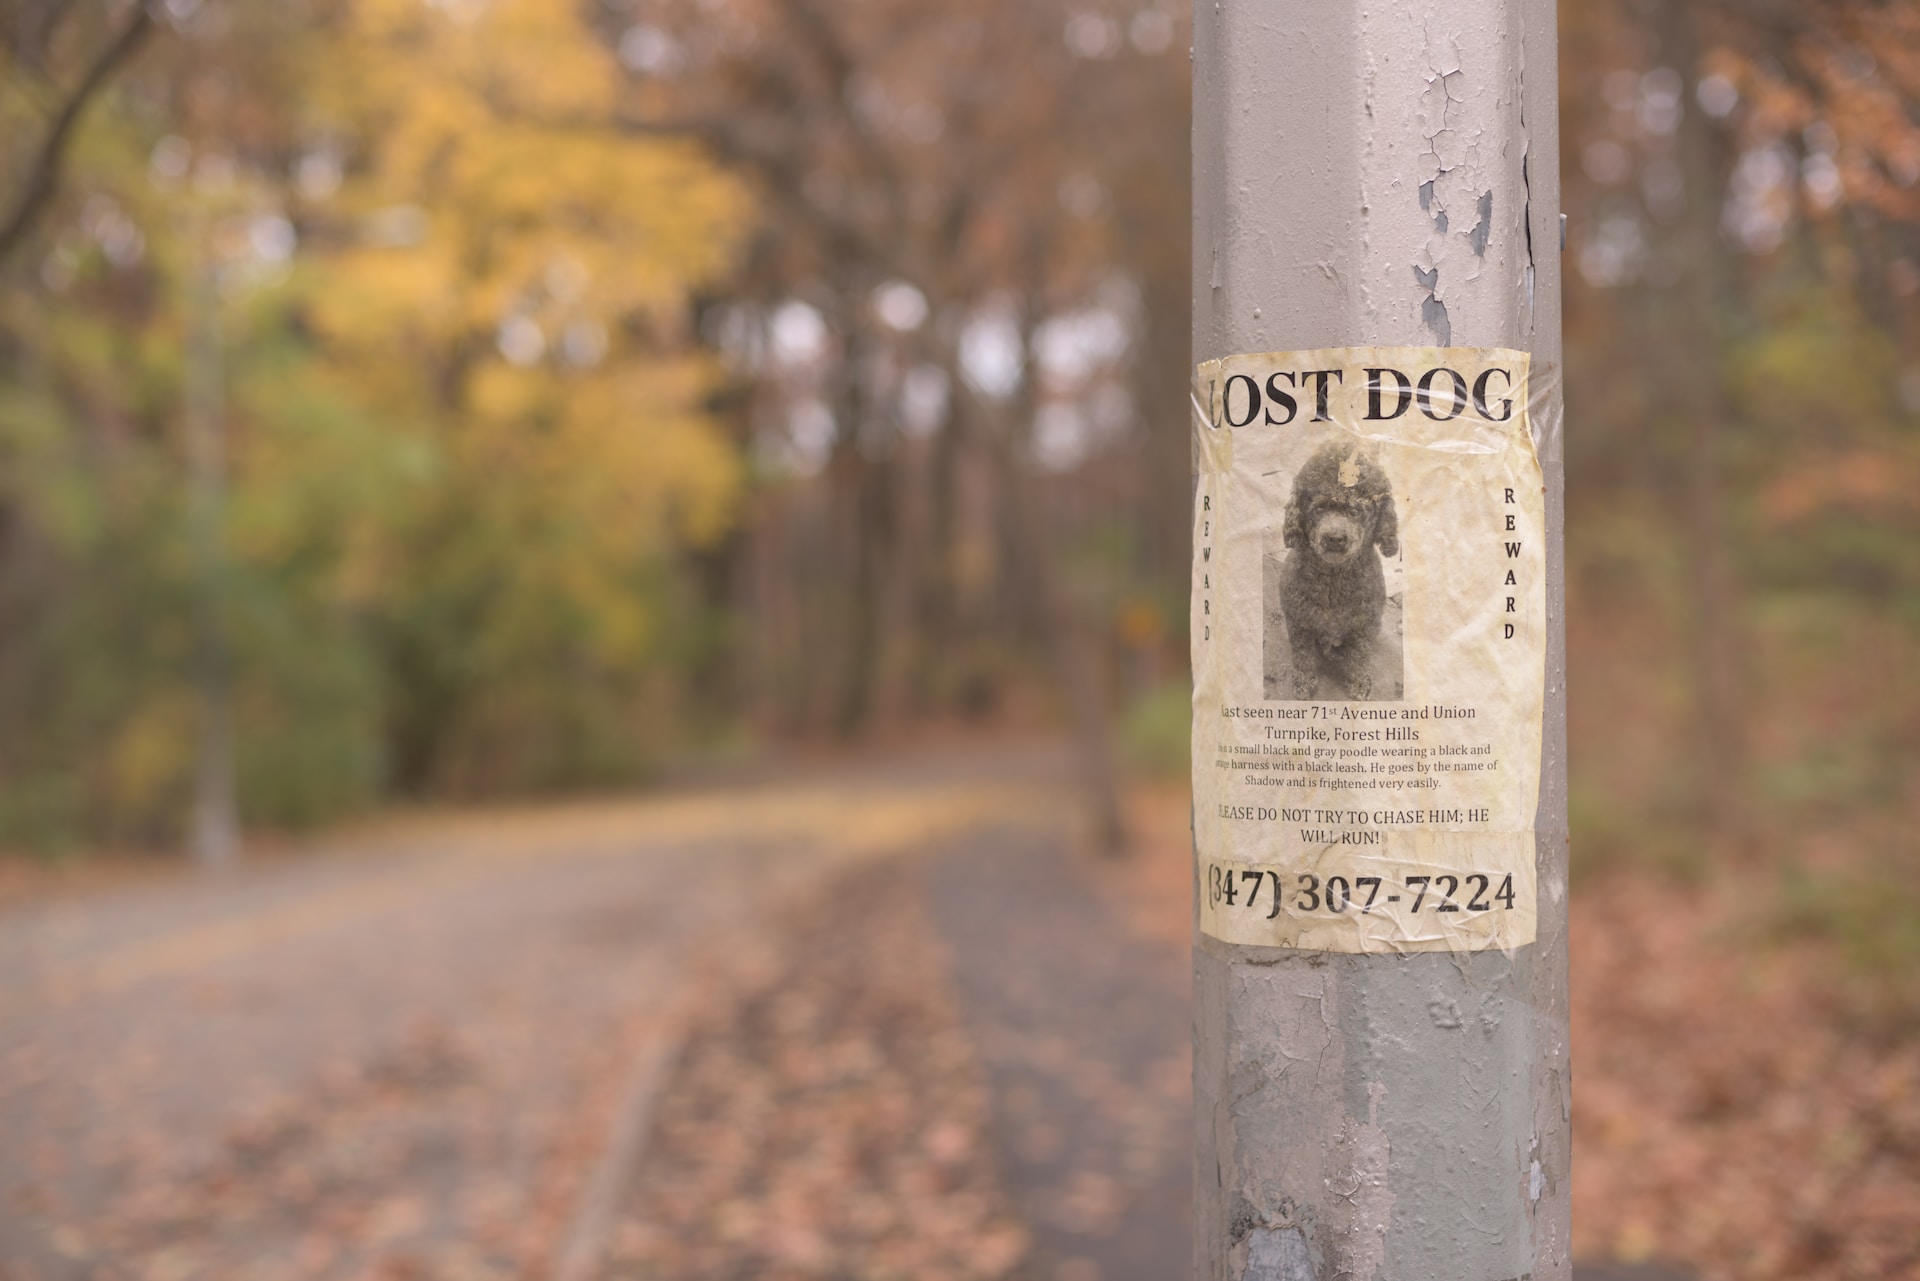 A lost dog poster on a streetlamp by a forest